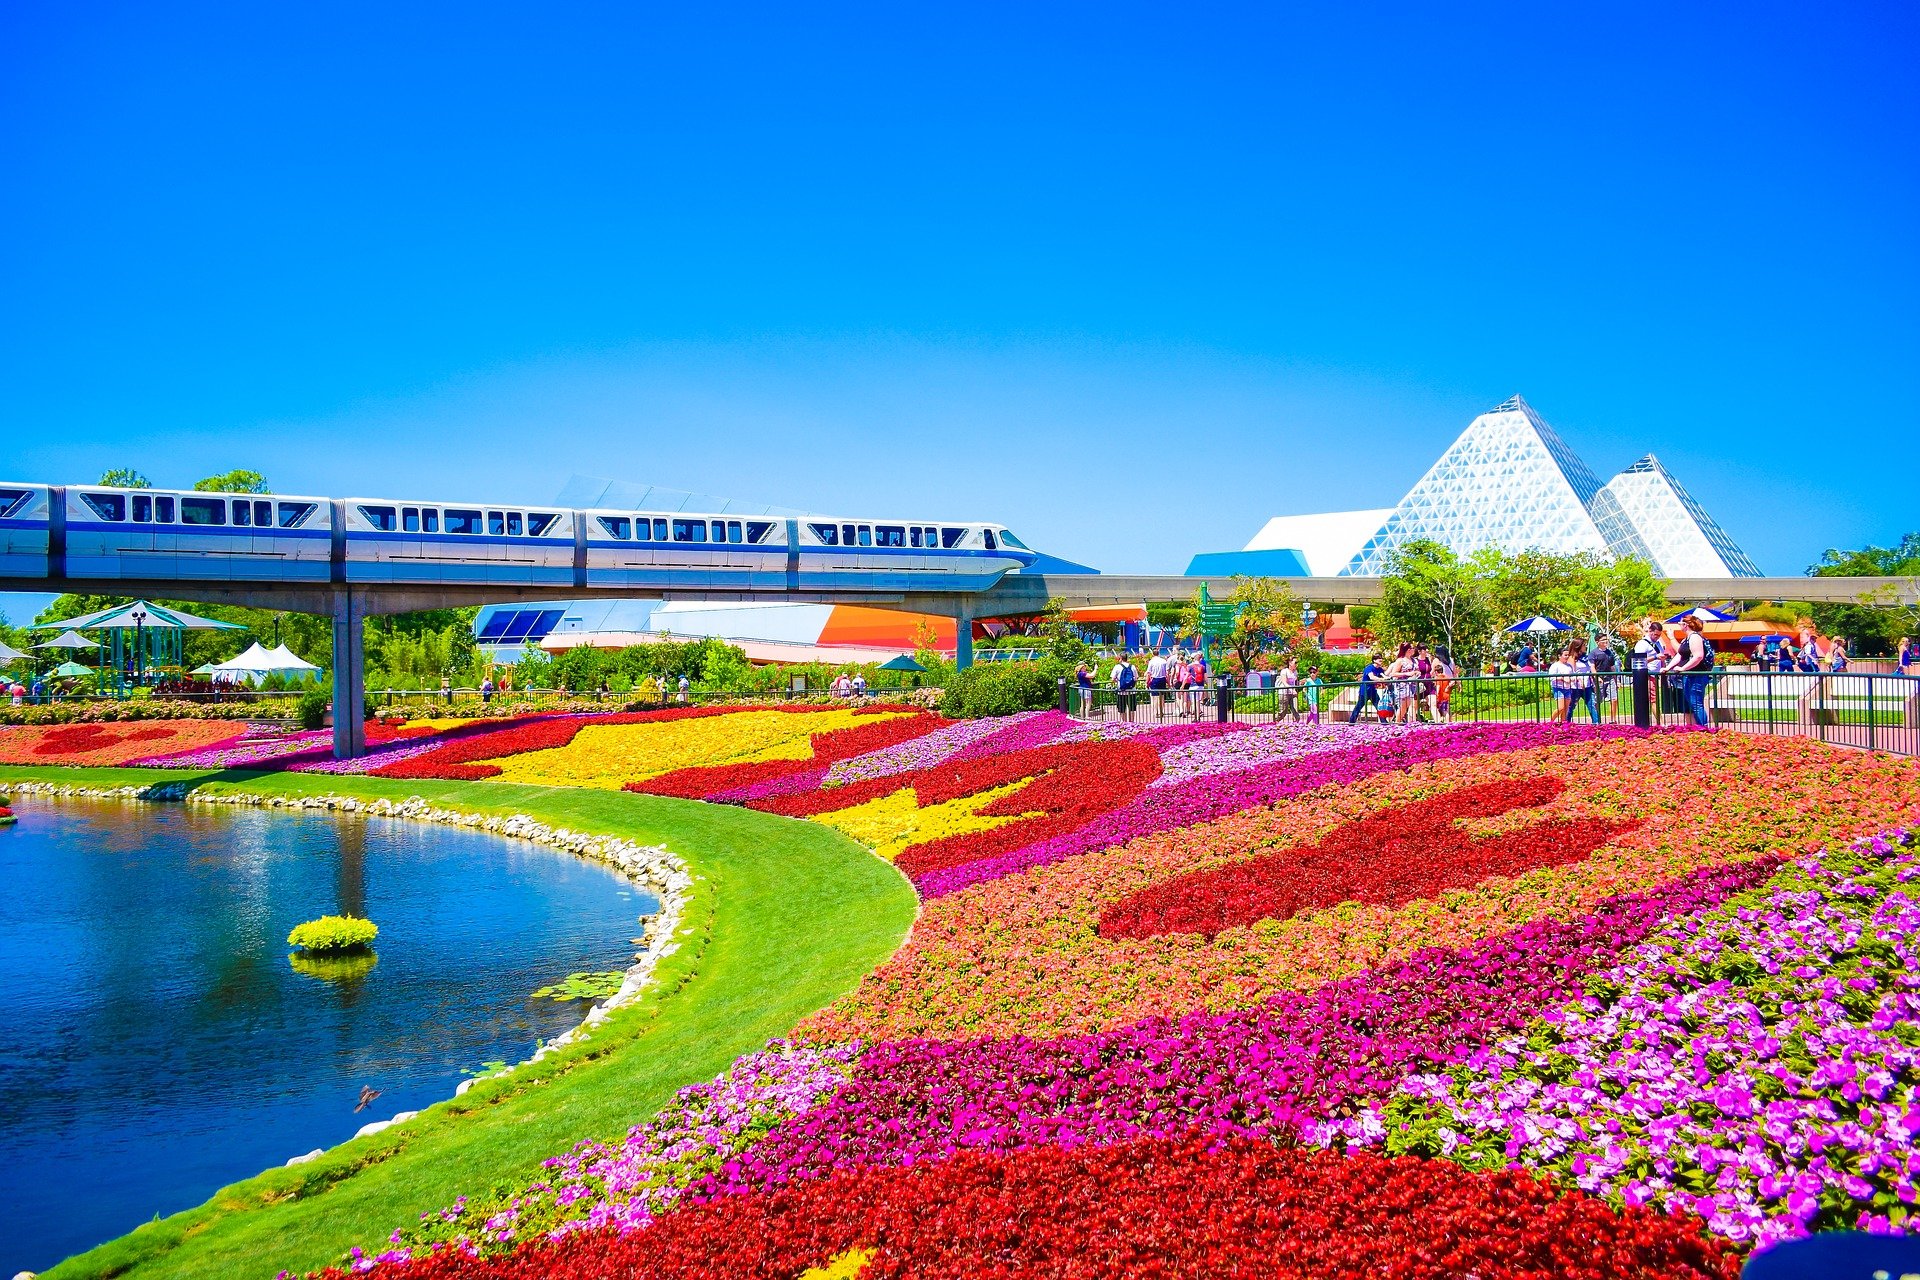 Walt Disney World's Epcot. There is a monorail going through the park